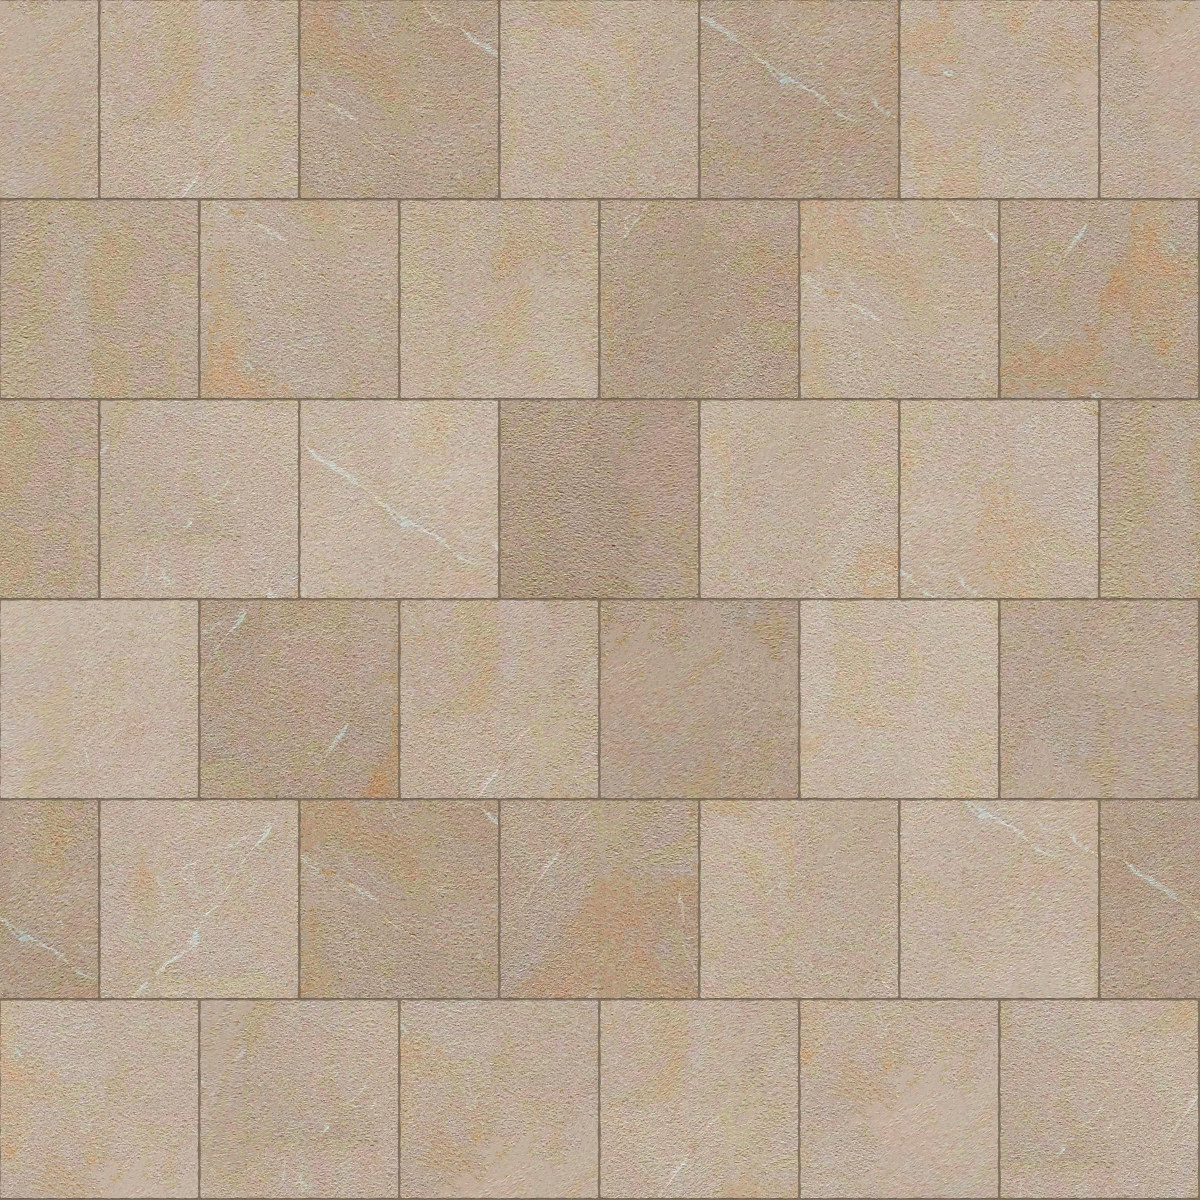 A seamless stone texture with limestone blocks arranged in a Stretcher pattern